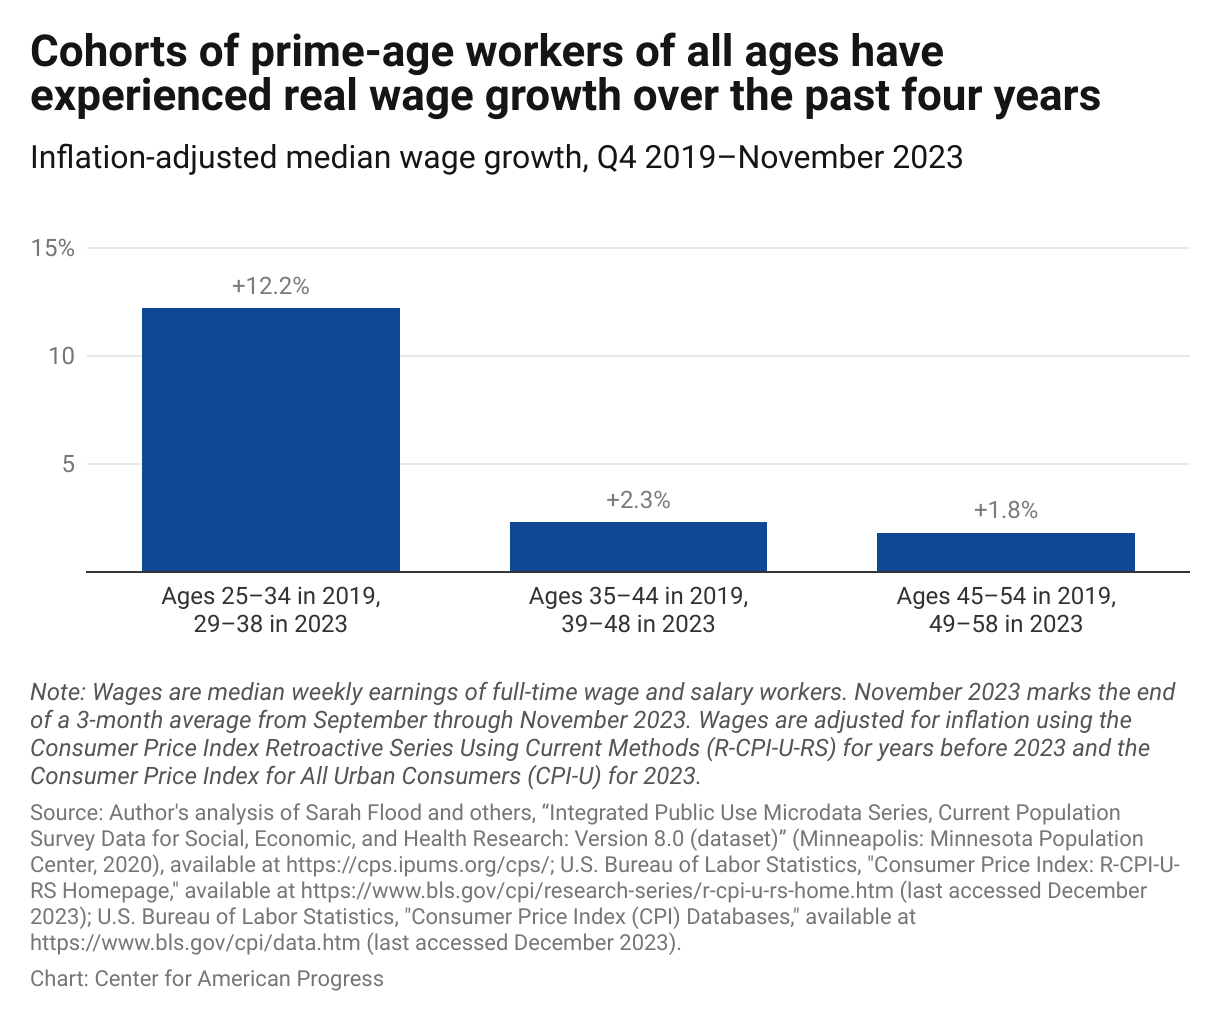 Bar graph showing that each 10-year age group of prime-age workers saw real wage growth from the last quarter of 2019 to November 2023, with those ages 25–34 in 2019 seeing an 11.1 percent increase.